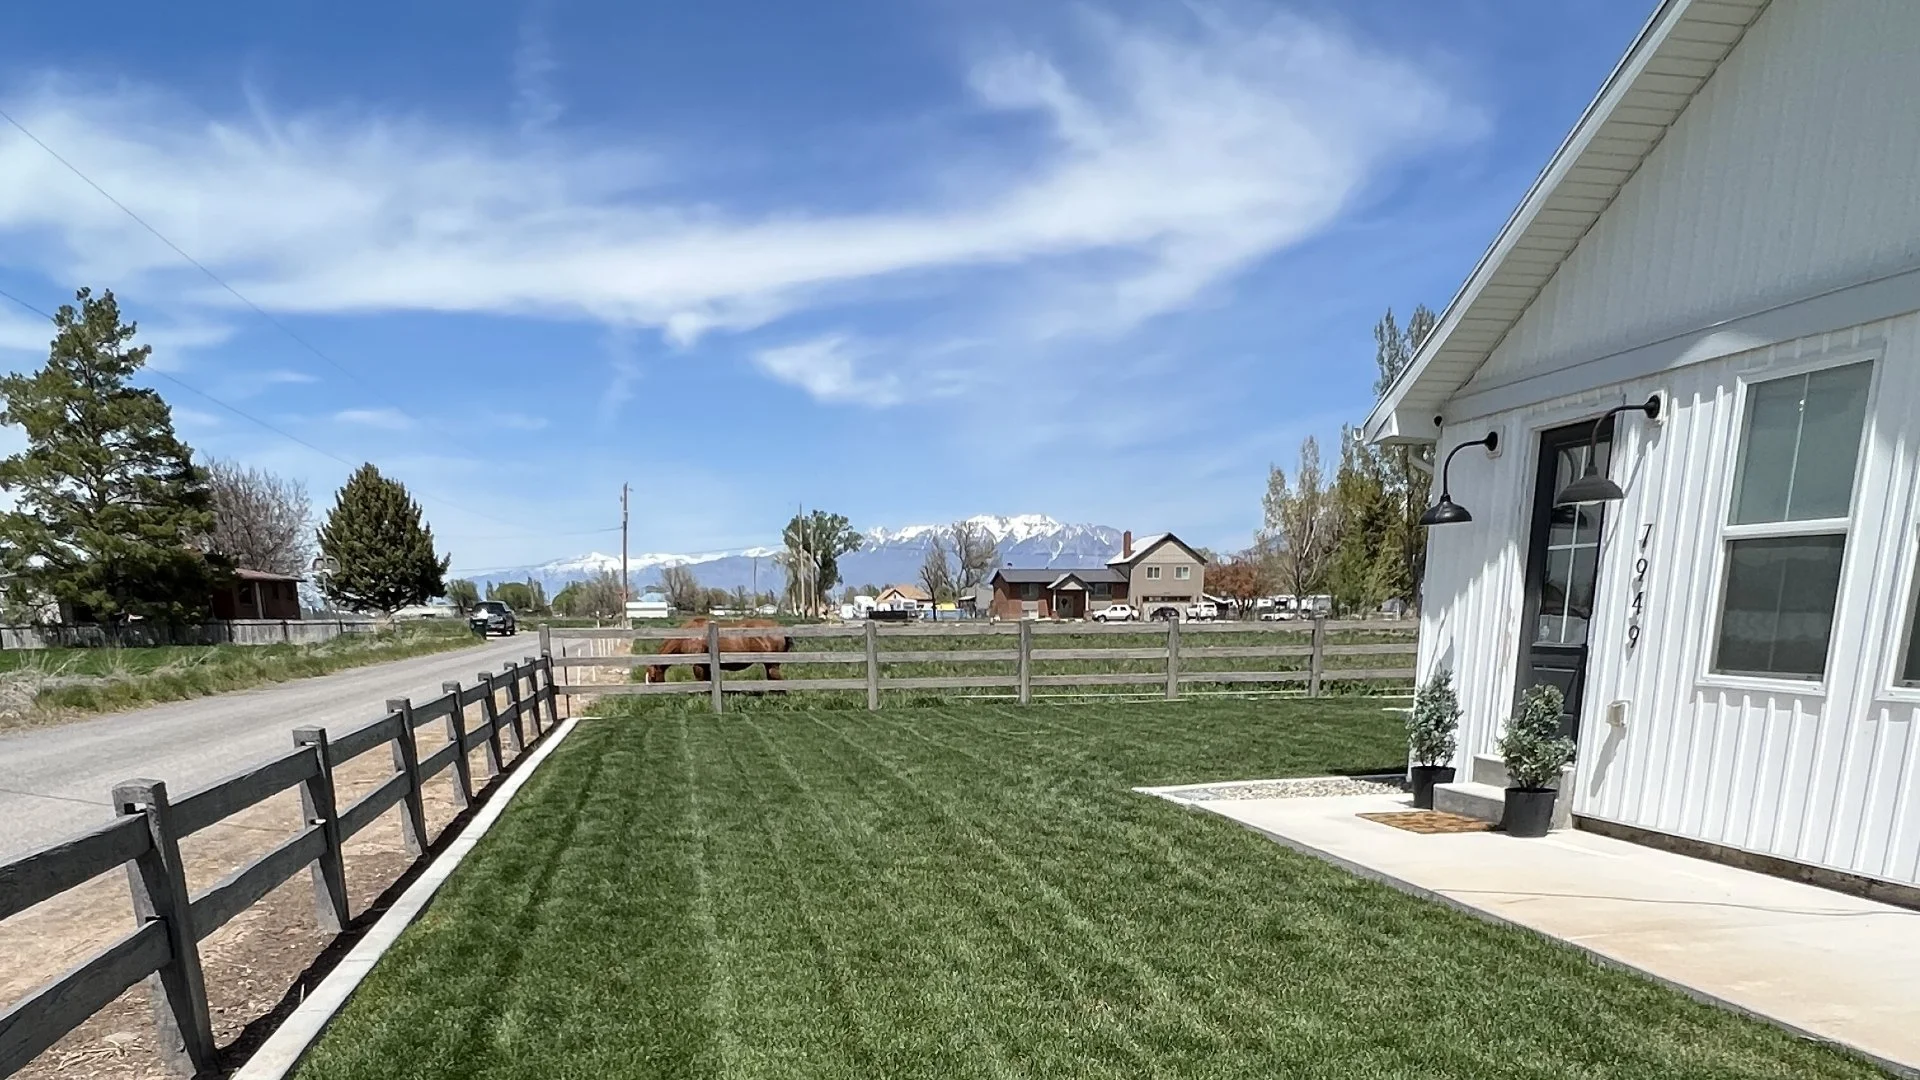 Customer's green lawn in Midway, UT from our lawn services.